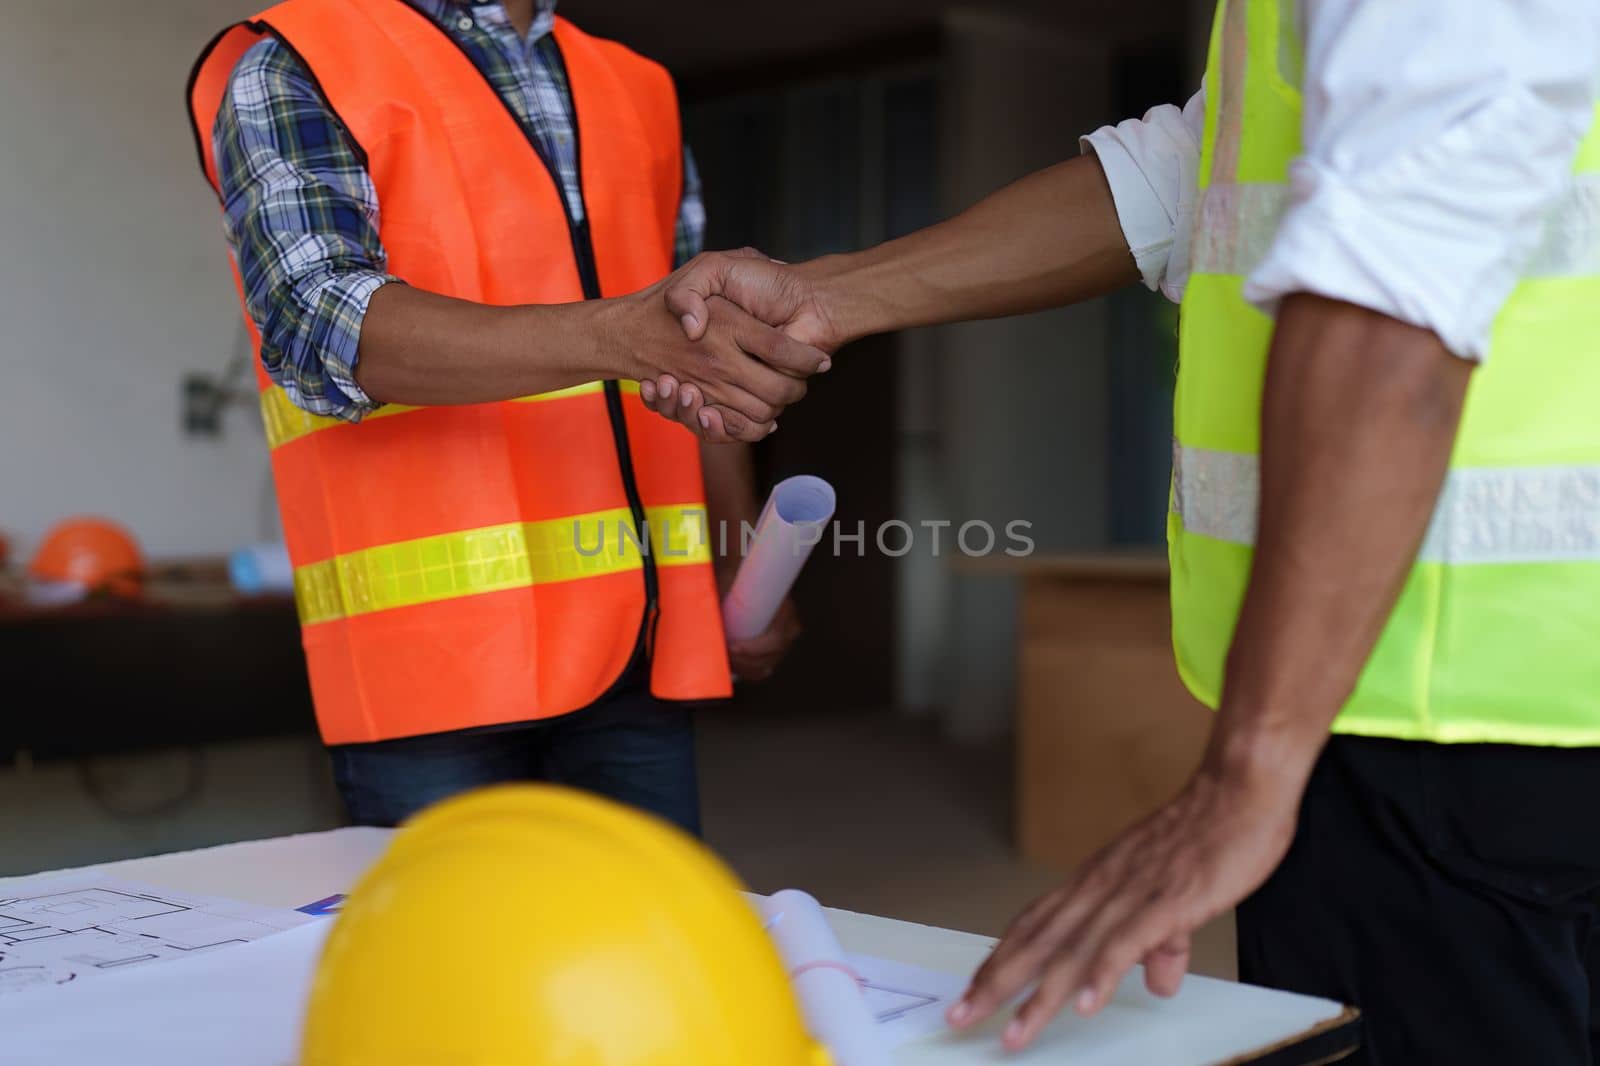 Architect and engineer construction workers shaking hands after finish an agreement in the office construction site, success collaboration concept by itchaznong